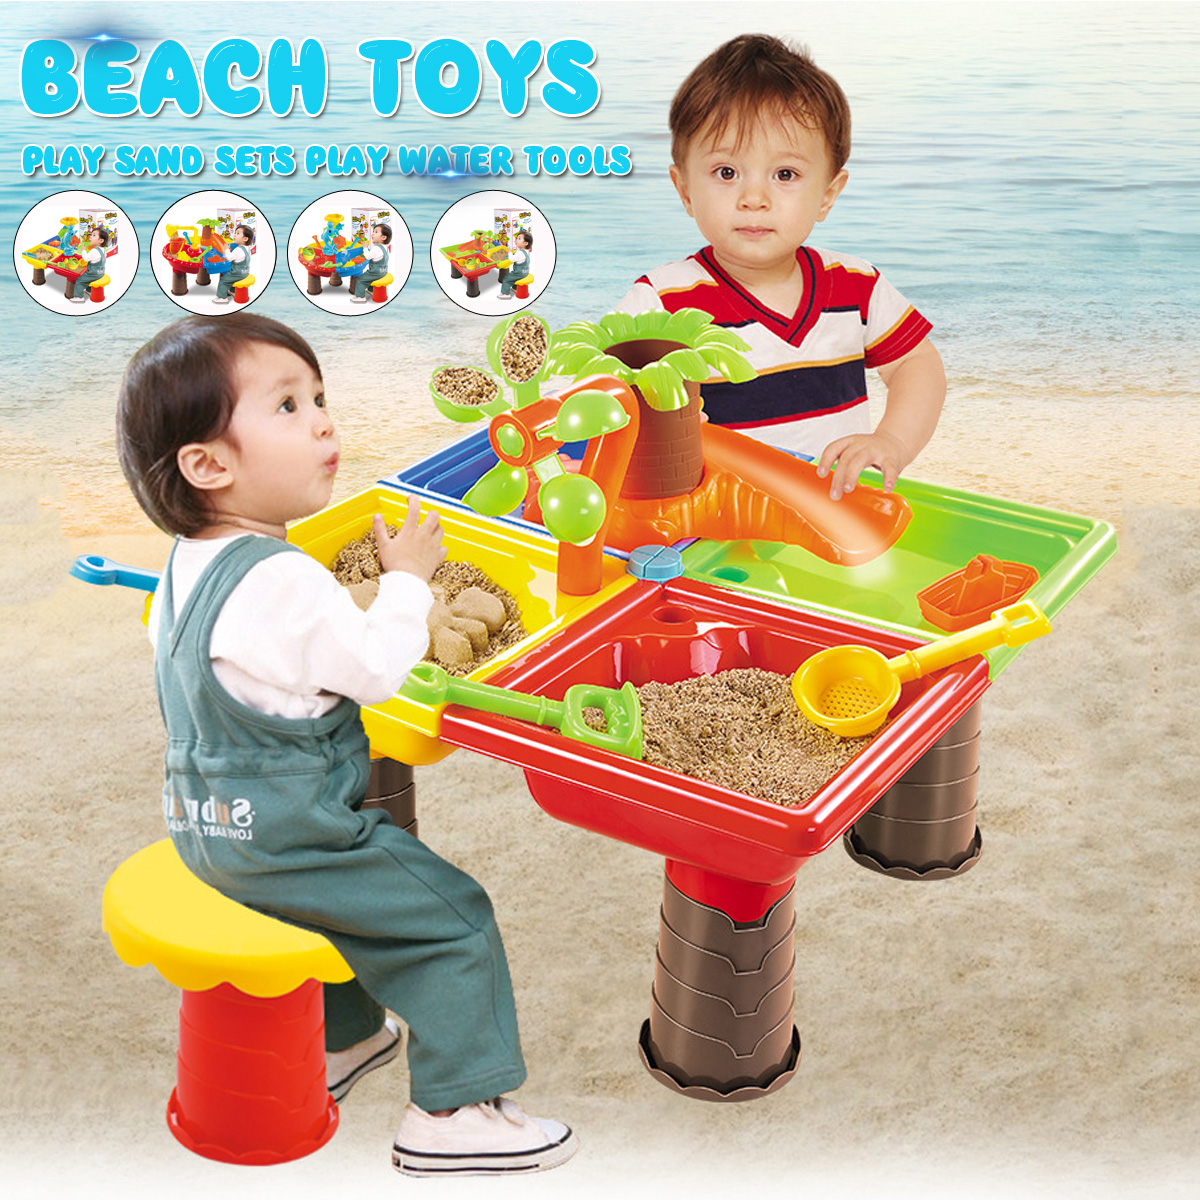 2-IN-1-Multi-style-Summer-Beach-Sand-Kids-Play-Water-Digging-Sandglass-Play-Sand-Tool-Set-Toys-for-K-1699507-2